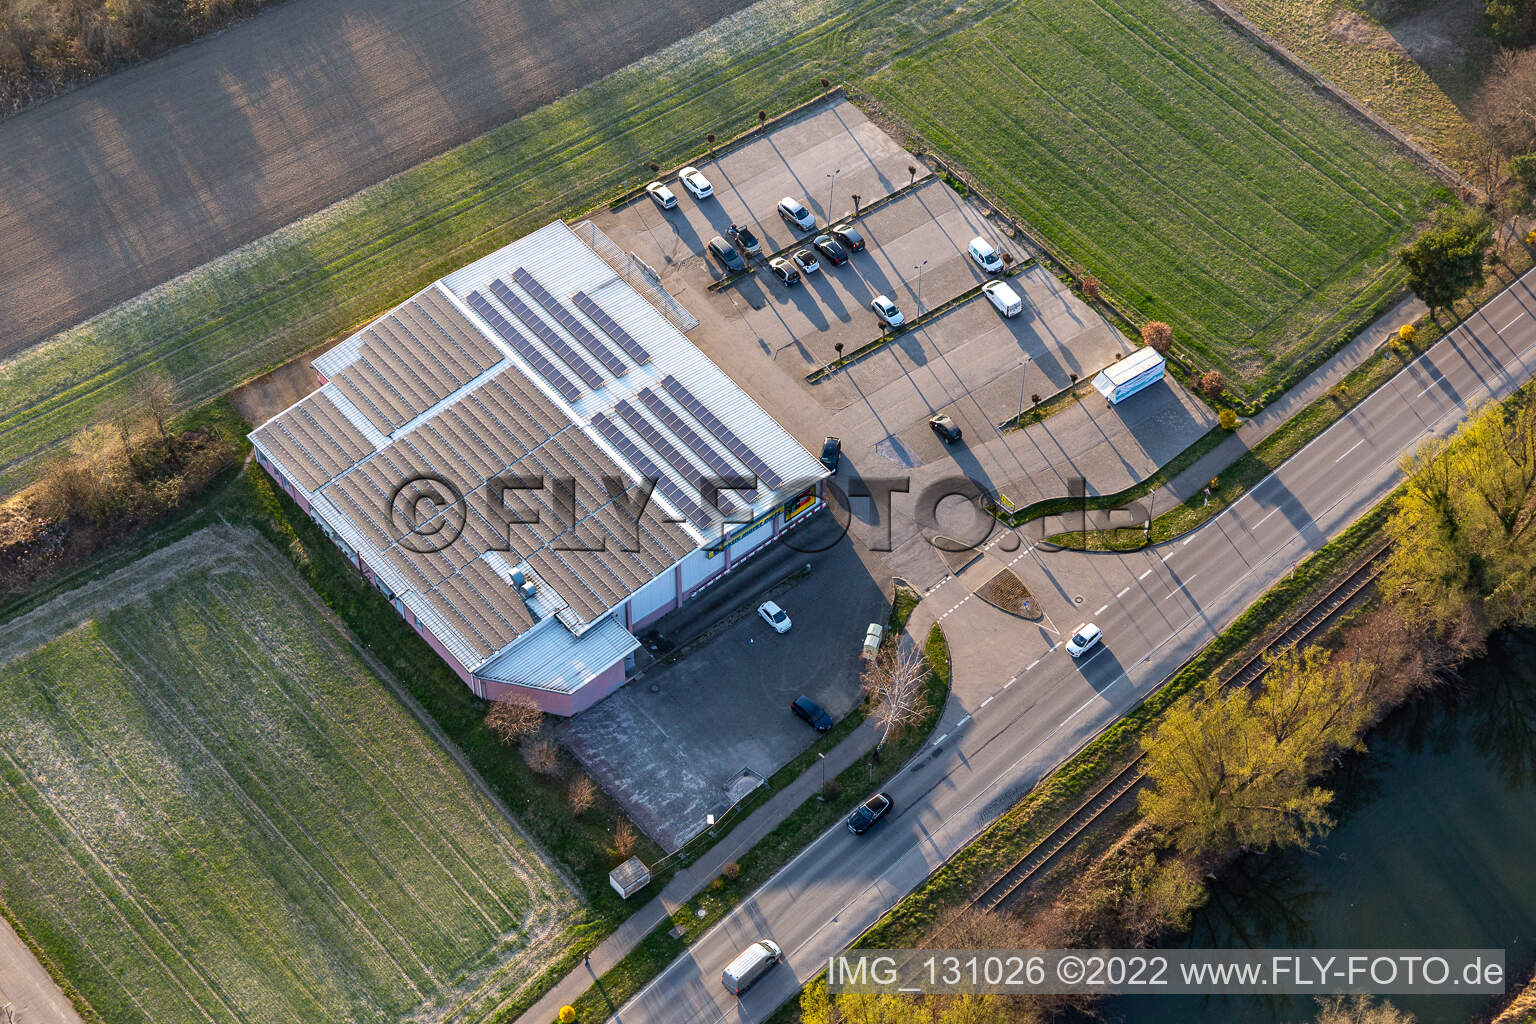 Aerial view of EDEKA Dietz in Hagenbach in the state Rhineland-Palatinate, Germany